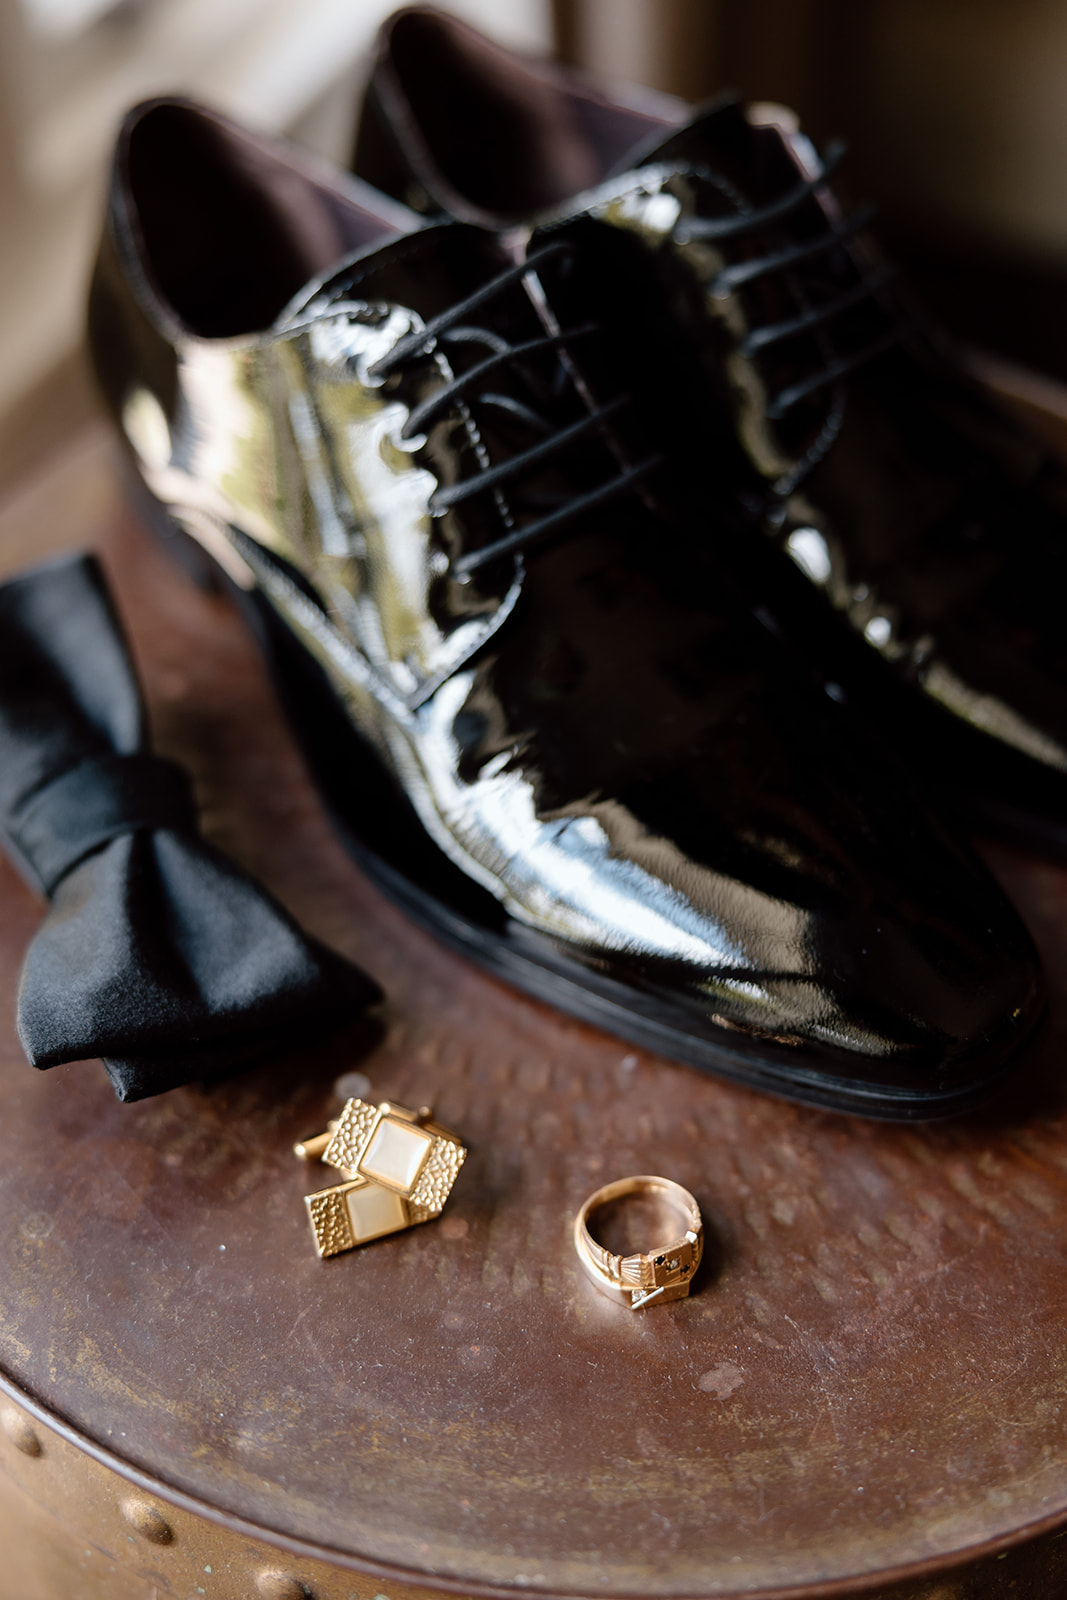 Groom details at the wedding in the Southern Highlands Bendooley Estate